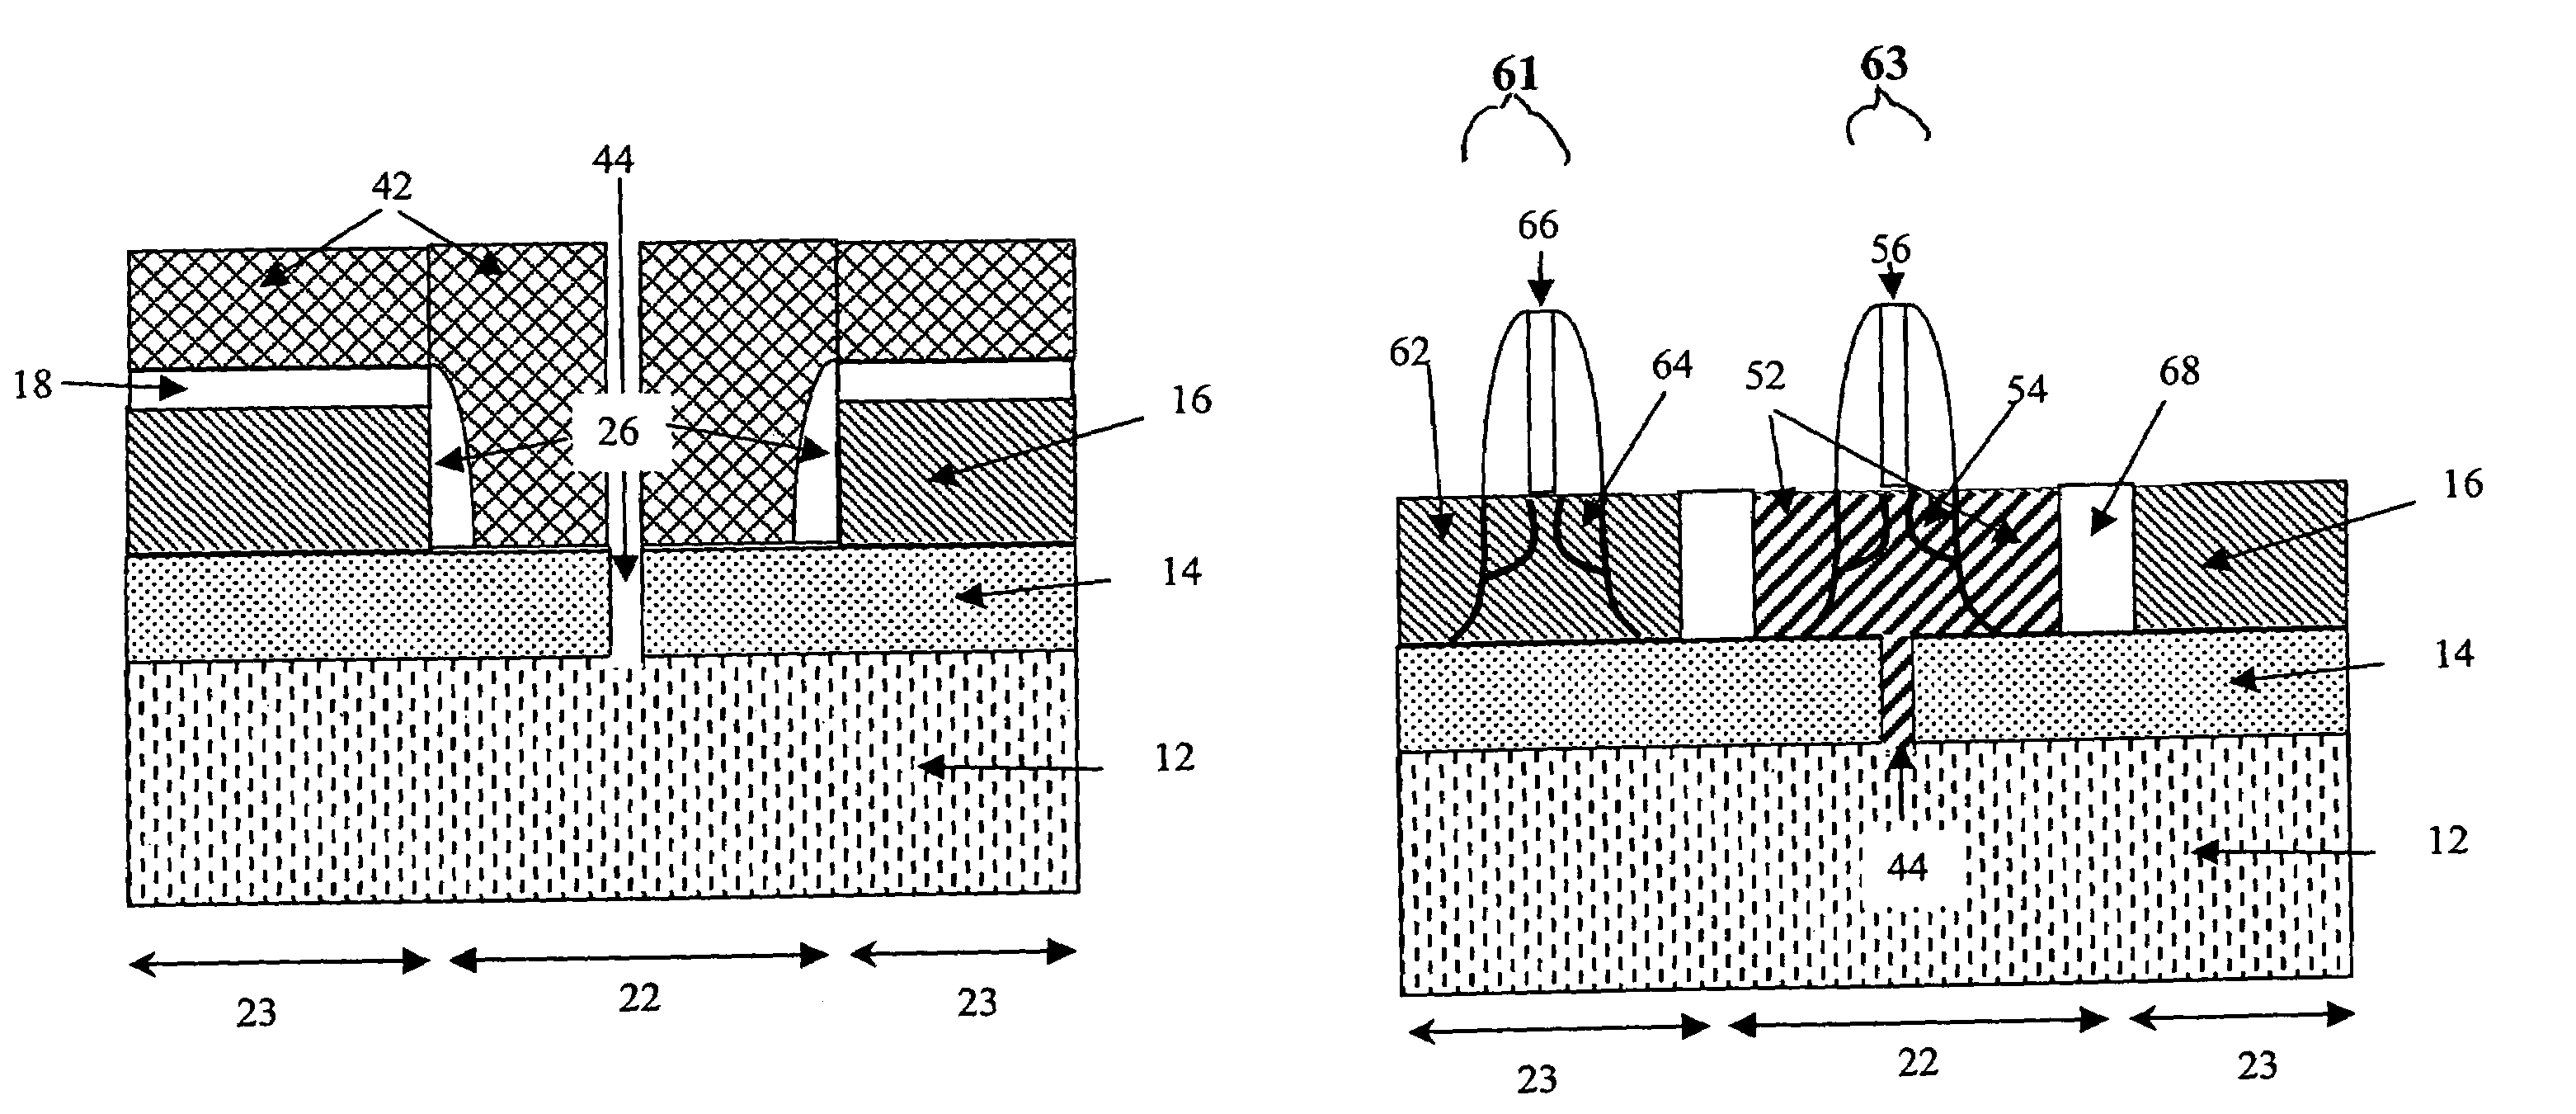 Hybrid orientation CMOS with partial insulation process